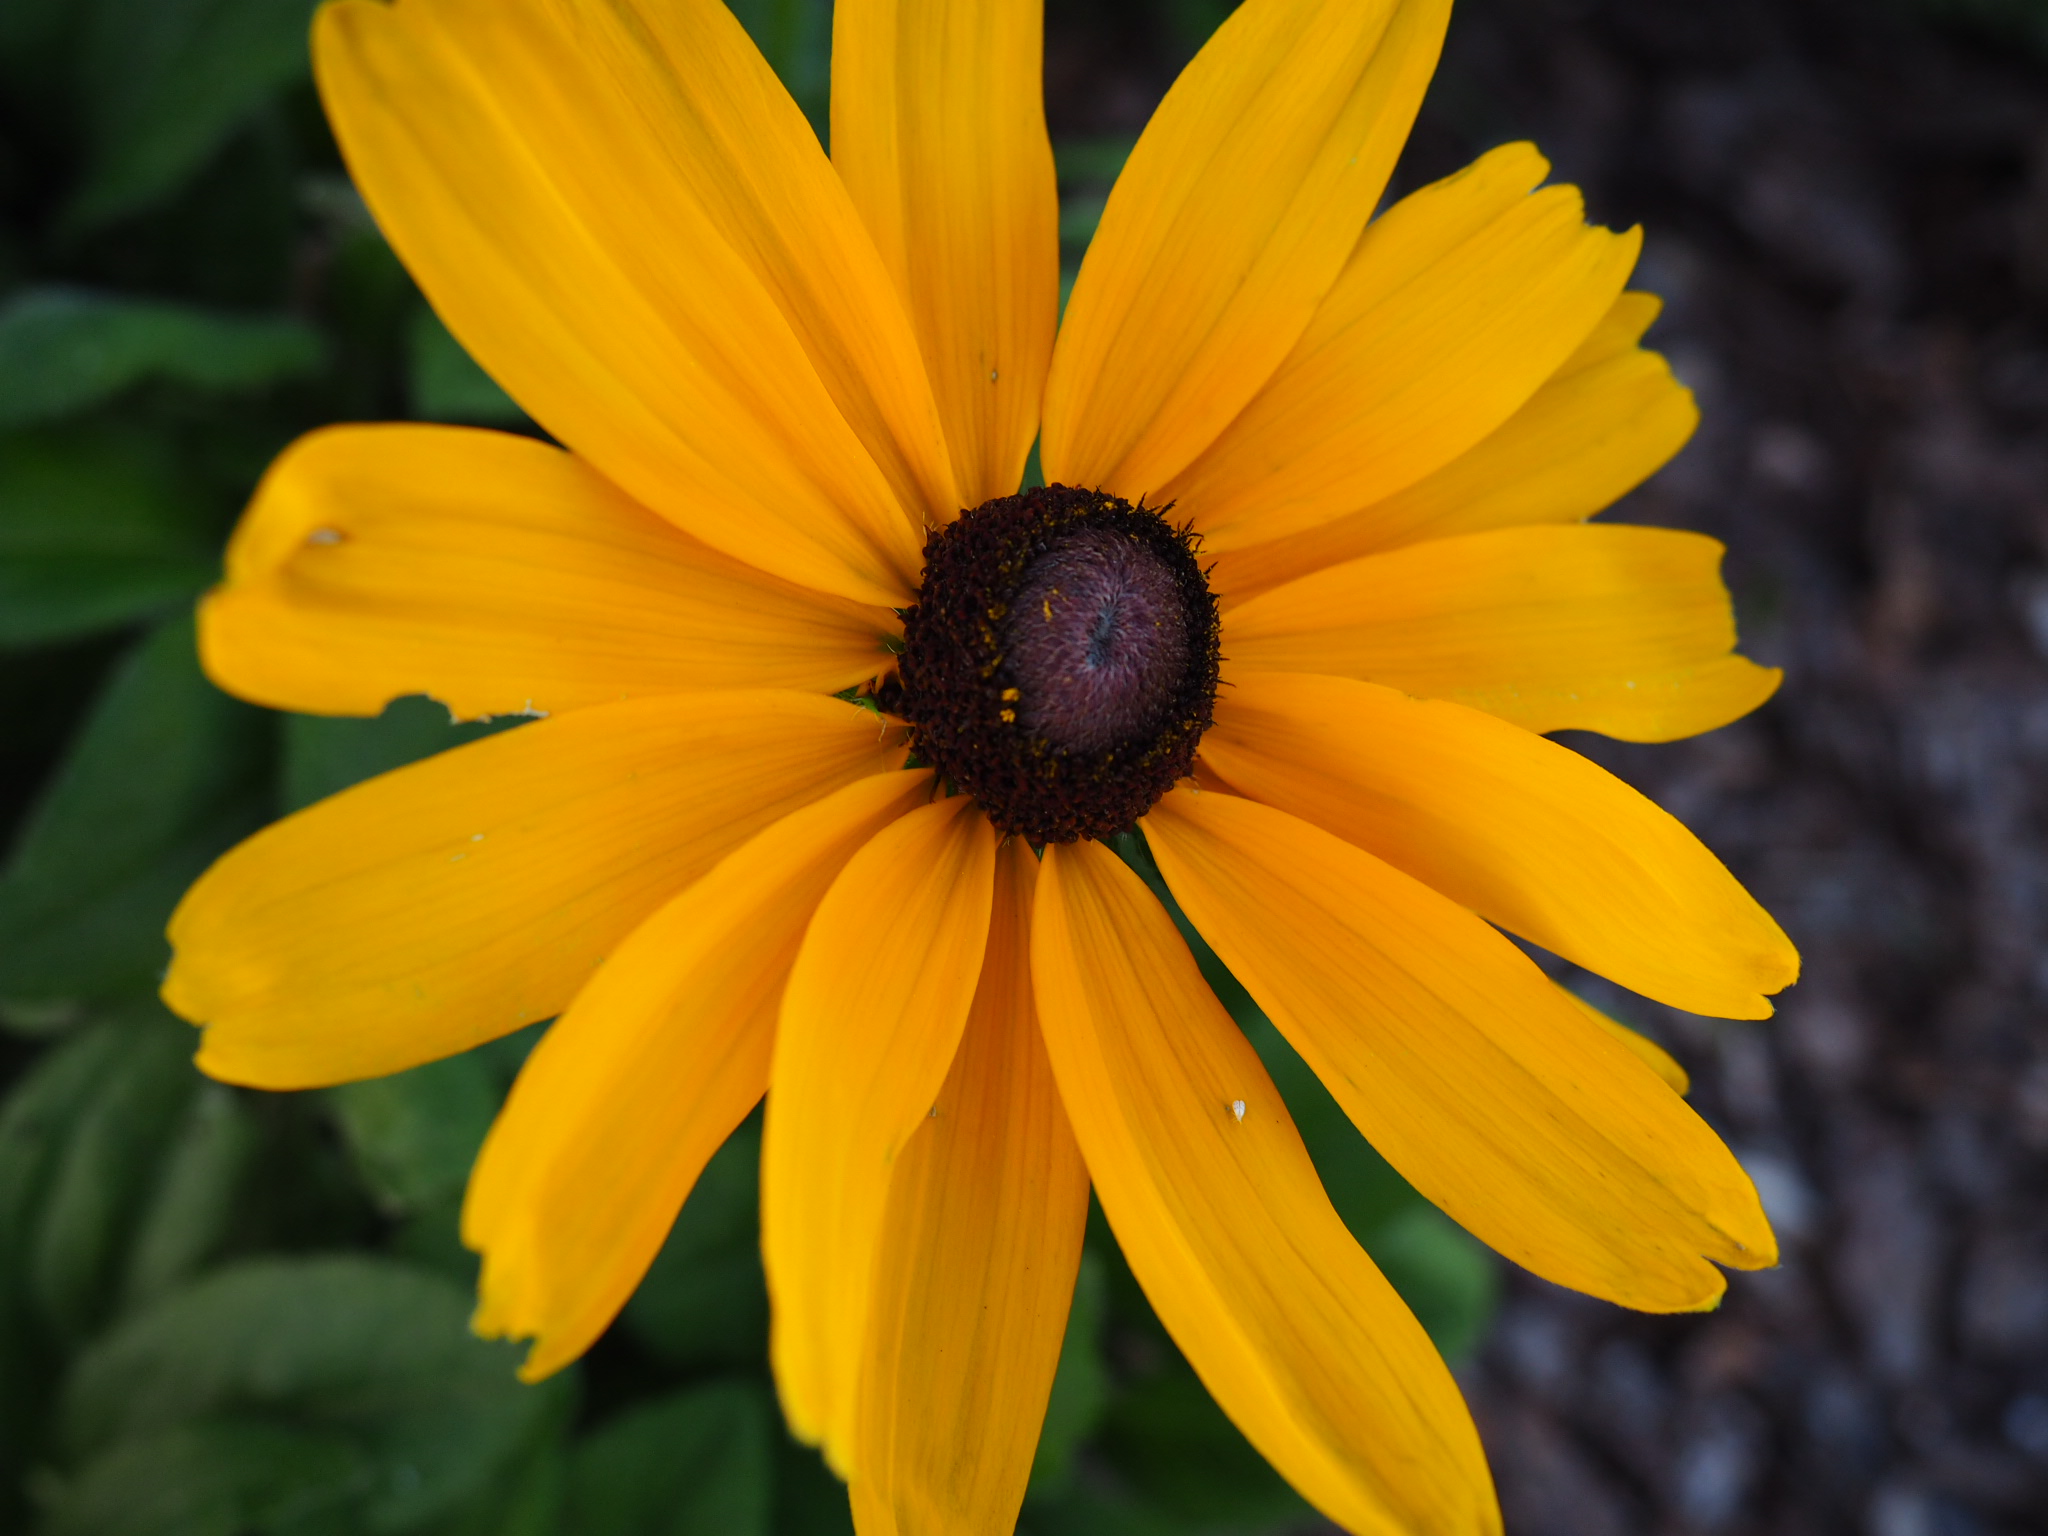 Photo Friday: Yellow Flower on a Fall Day